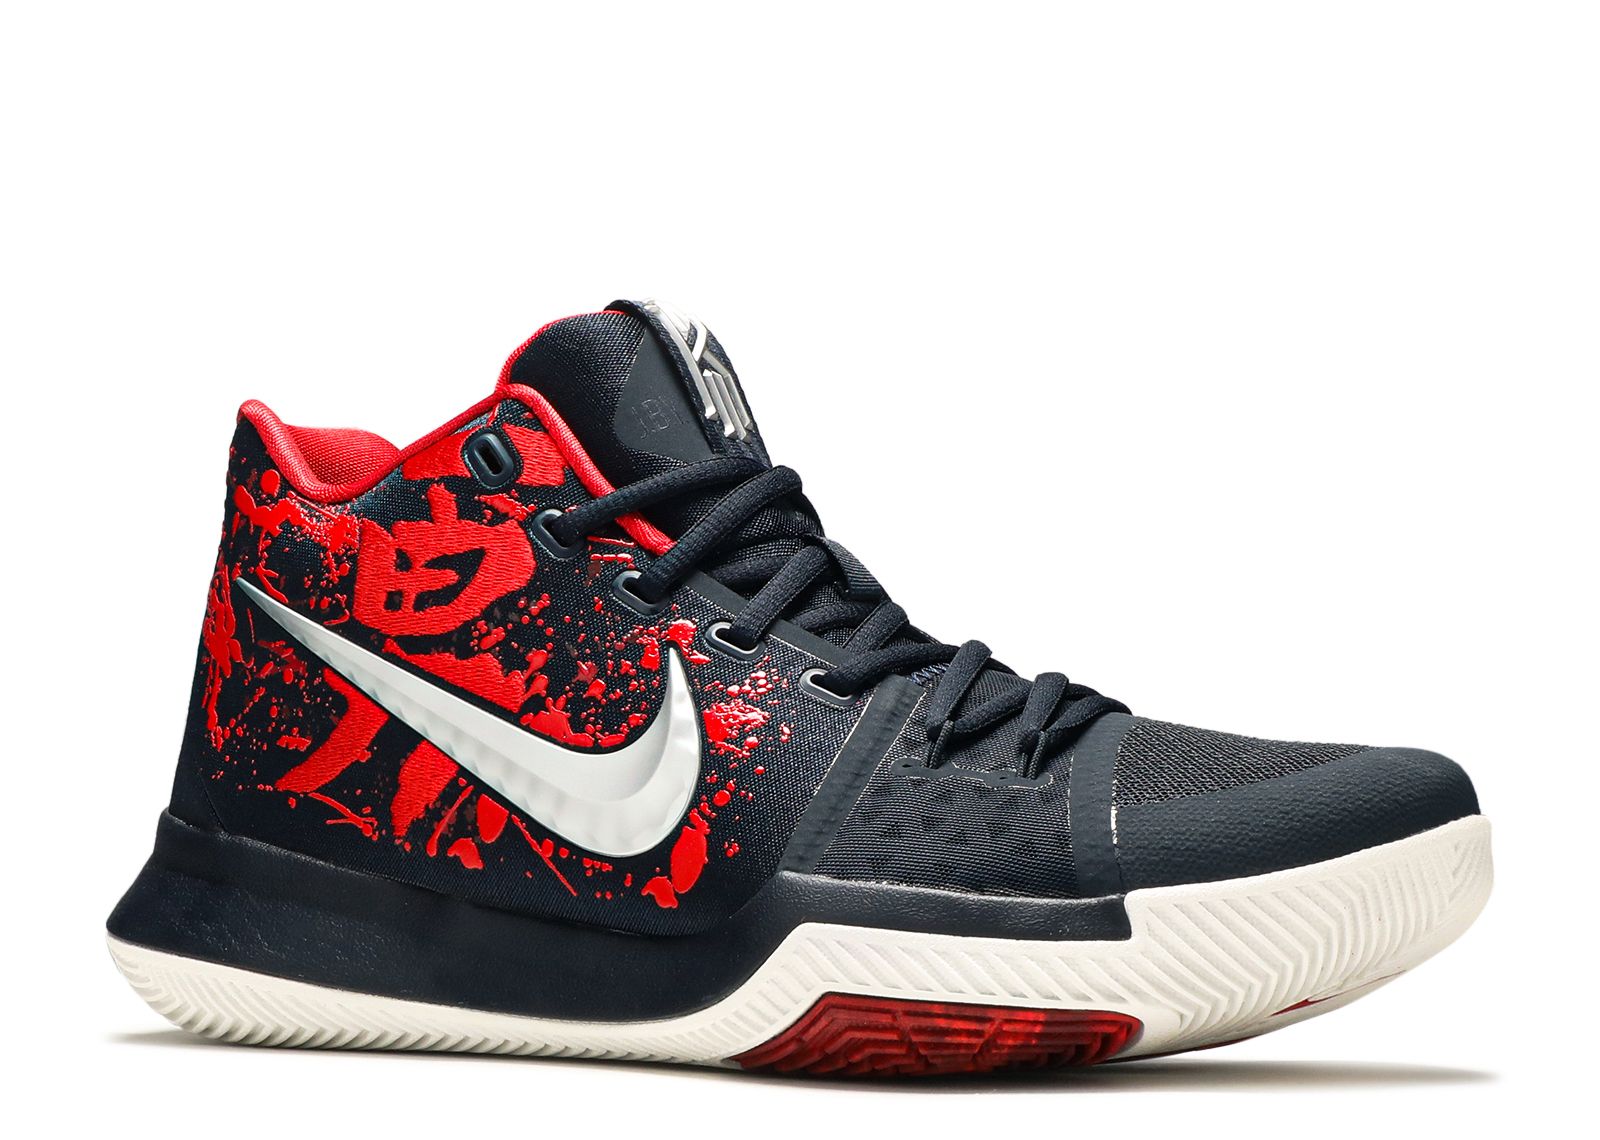 kyrie 3s red